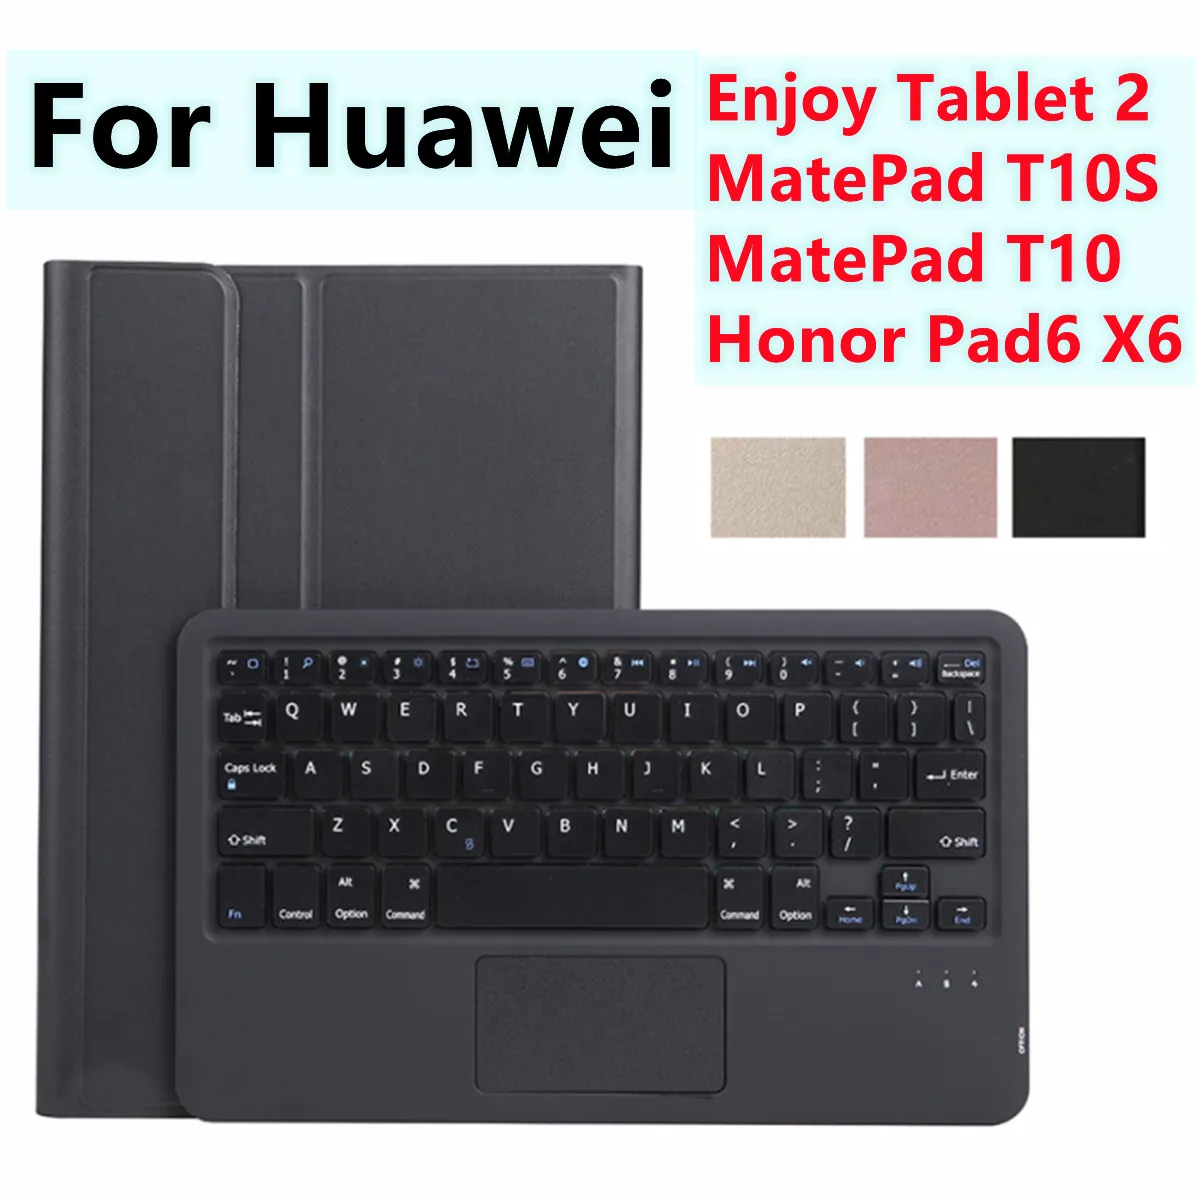 

Wireless Bluetooth Touchpad Keyboard Leather Case For Huawei Enjoy Tablet 2 10.1'' 2020 Honor Pad 6/X6 MatePad T10S / T10 Cover